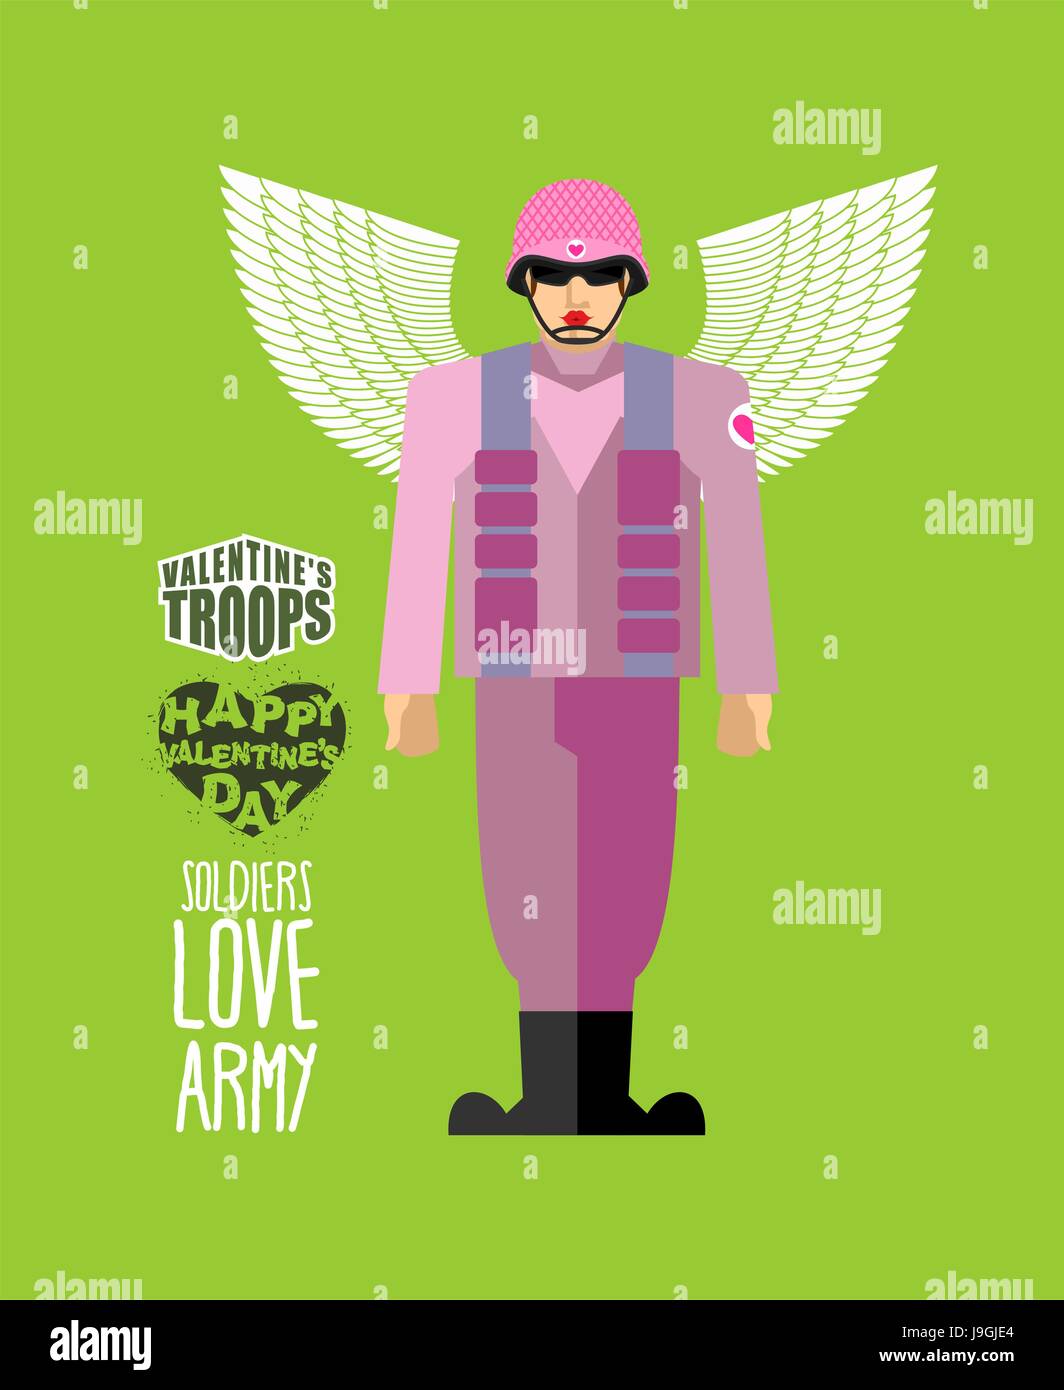 Soldiers love army. Cupid in uniform. Helmet and body armor. Military officer with wings. Valentines troops. Funny character for Valentines day on Feb Stock Vector